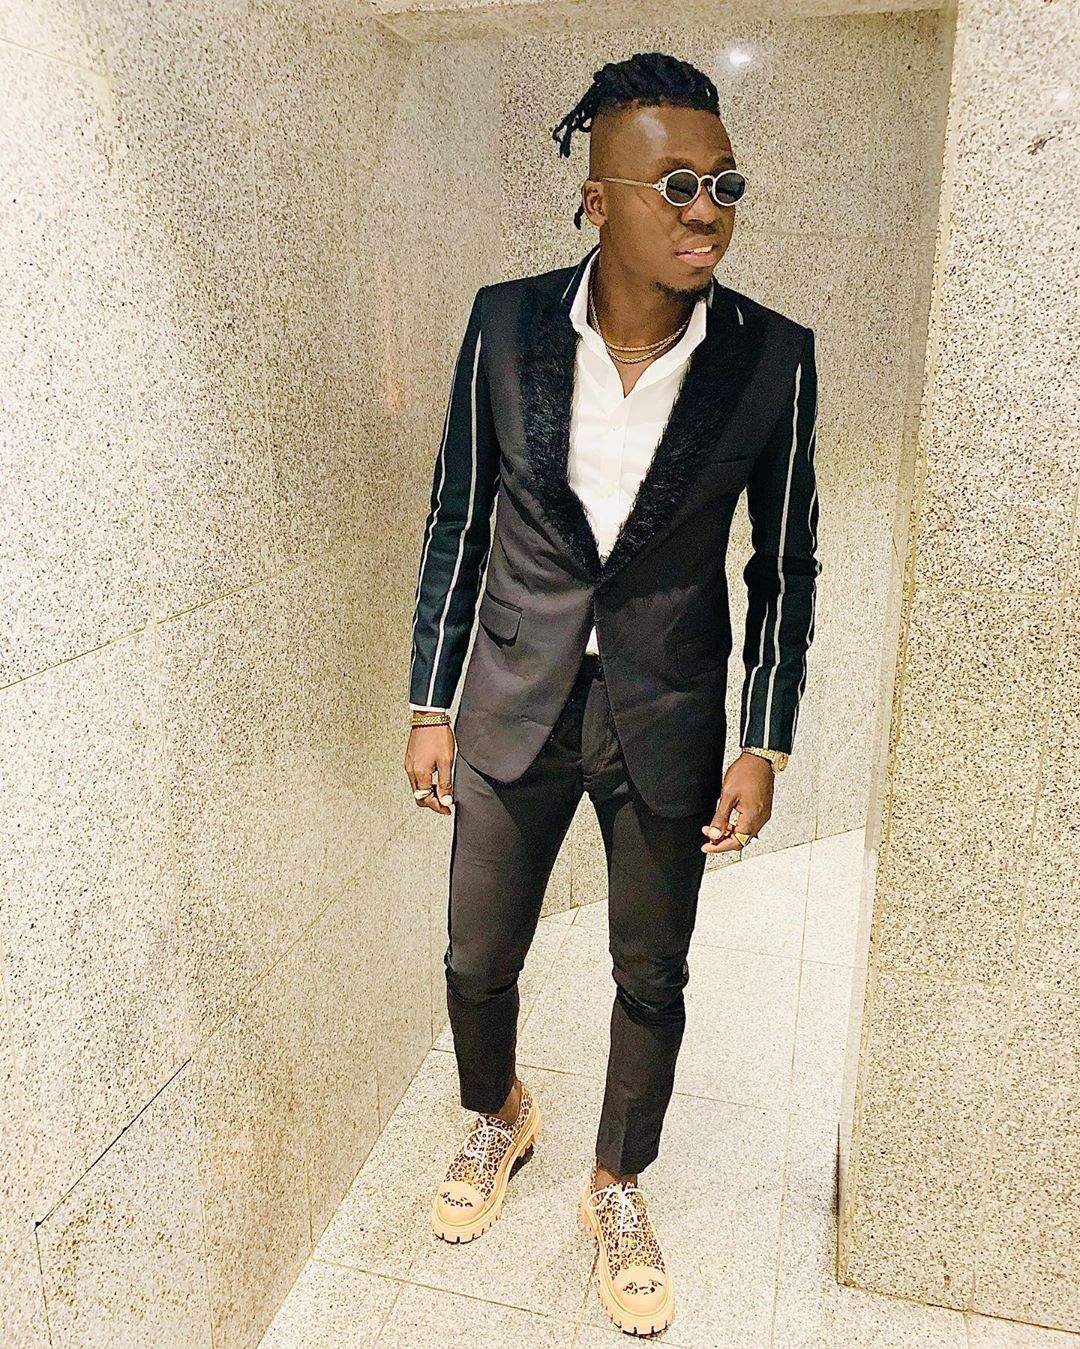 Akpororo goes on begging spree hours after flaunting shoe collection (video)